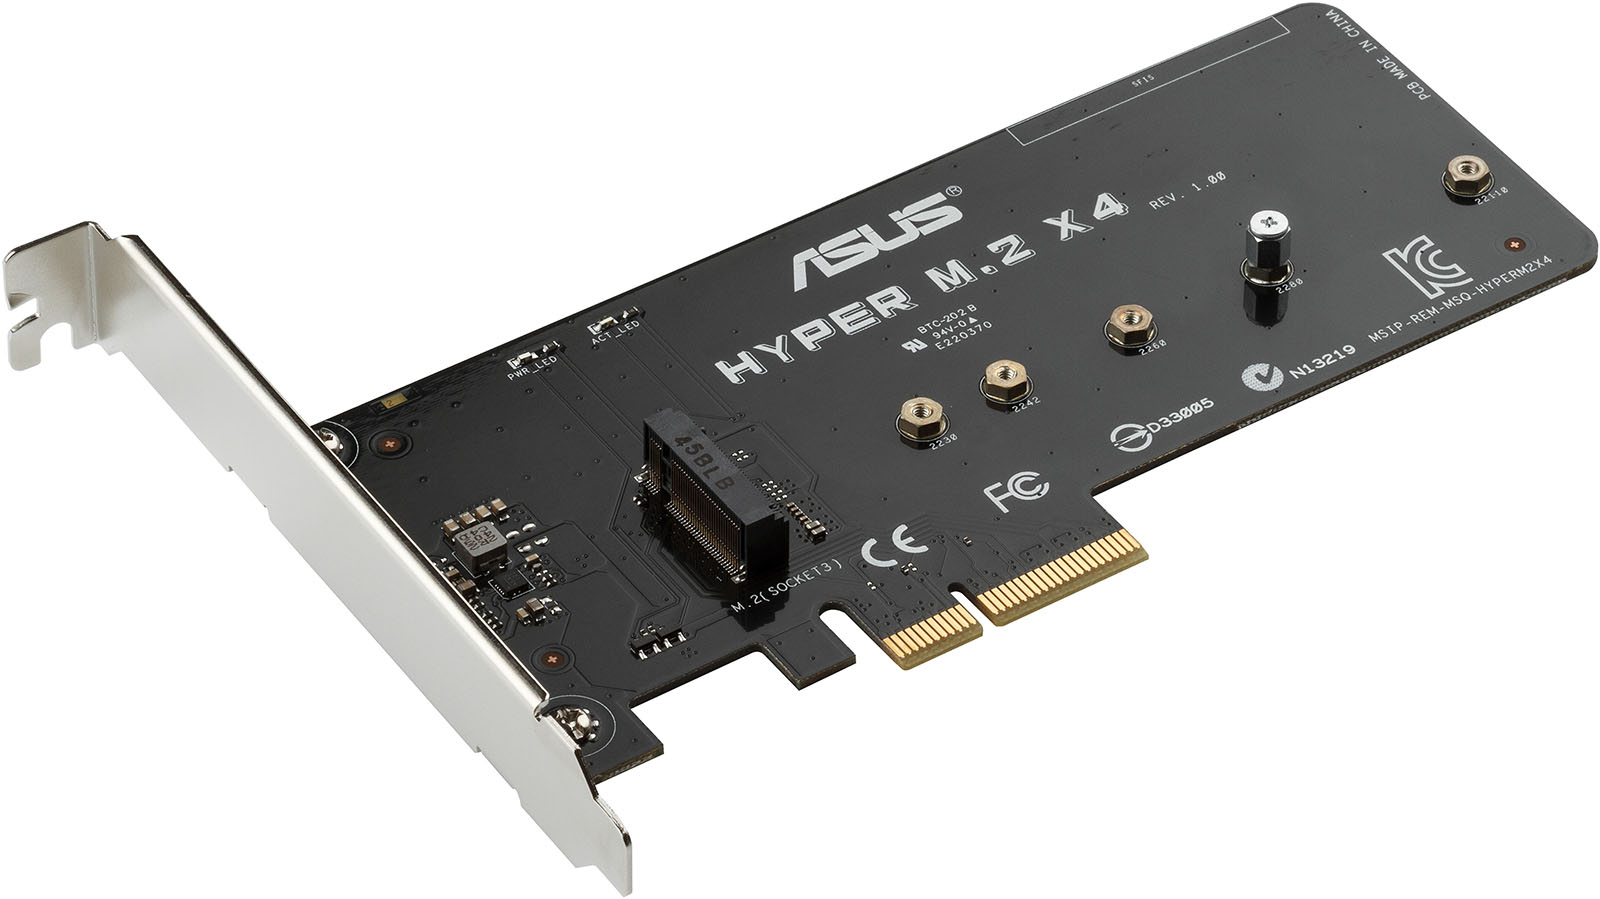 ASUS X99-DELUXE – M2 Add-in PCIe Card – Techgage